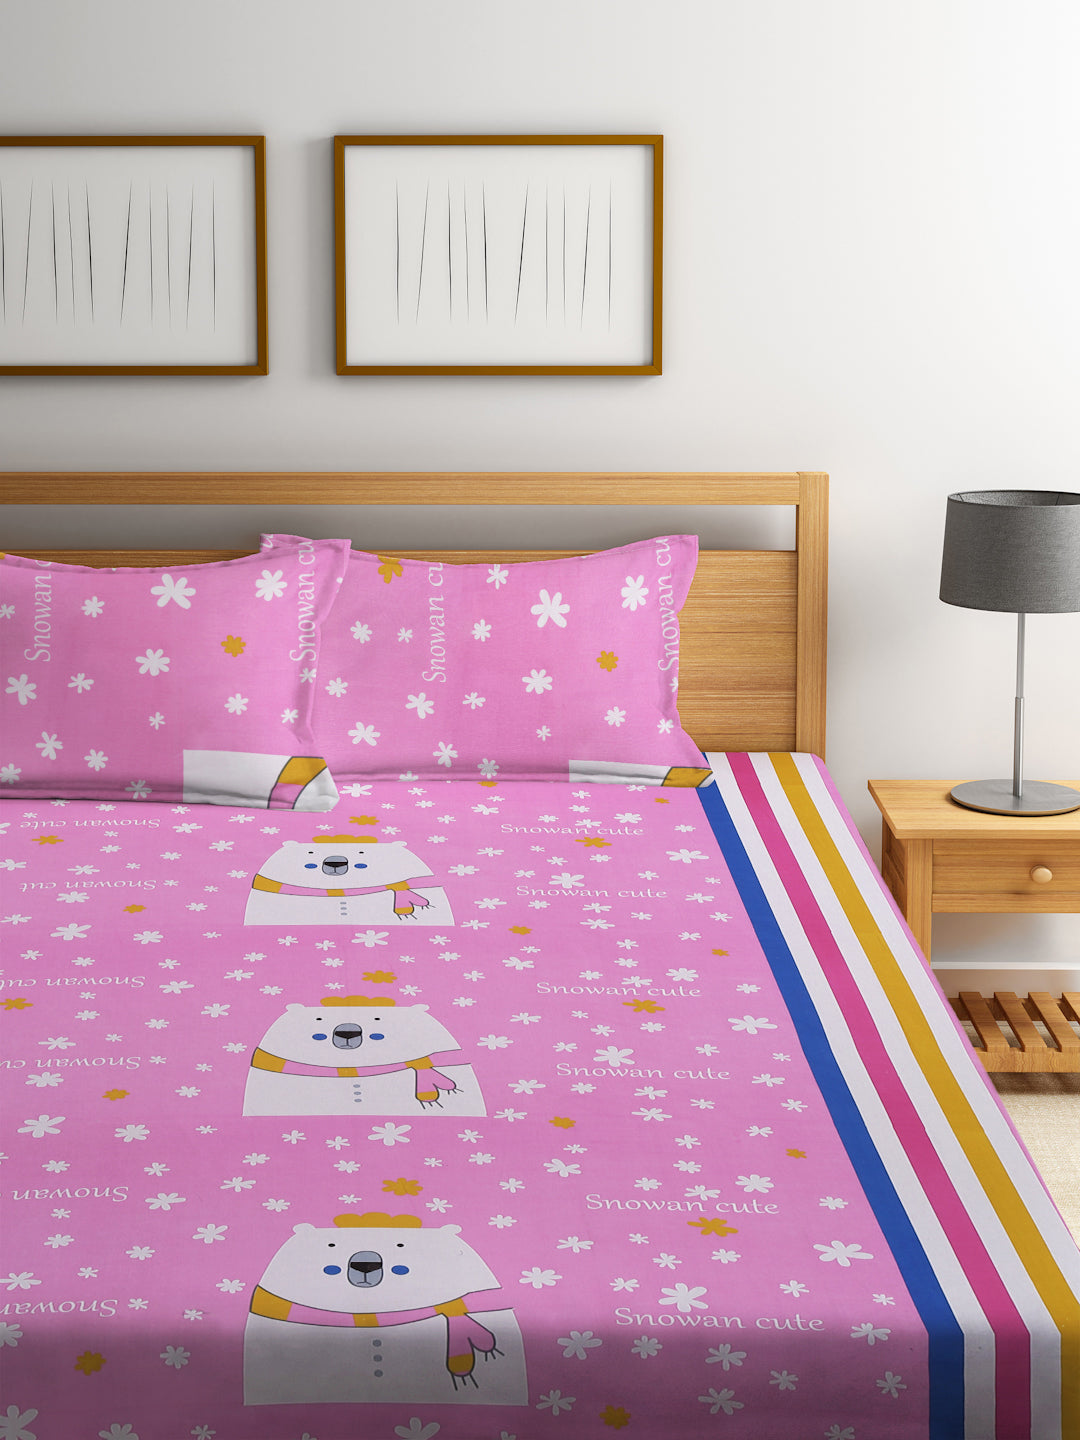 Klotthe Kids Pink Cotton 300 TC Double Bedsheet with 2 Pillow Covers